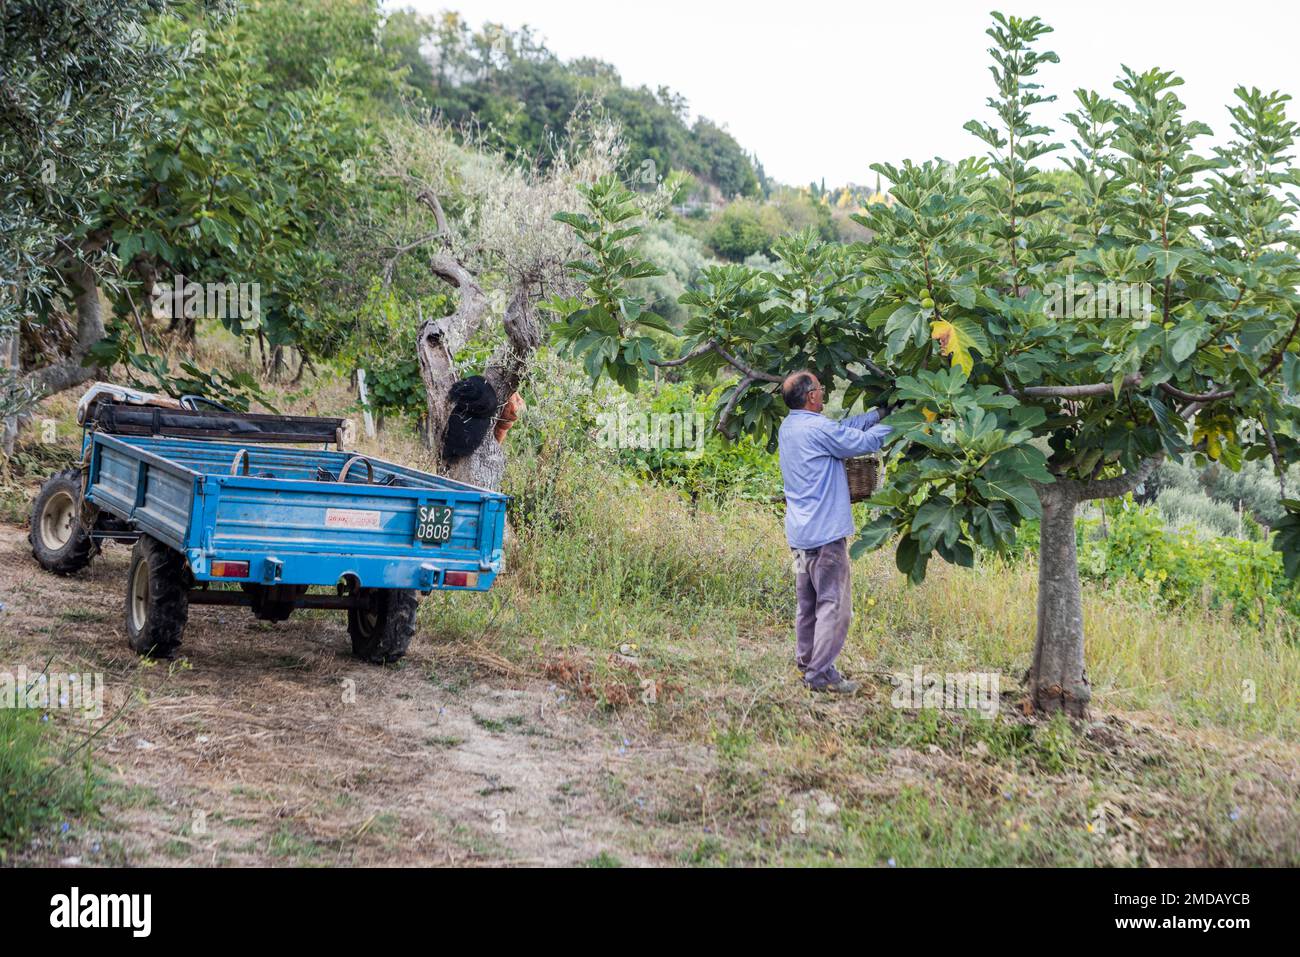 Ogliastro Cilento, Salerno, Italy - August 1, 2018: Man harvesting white figs from his land Stock Photo